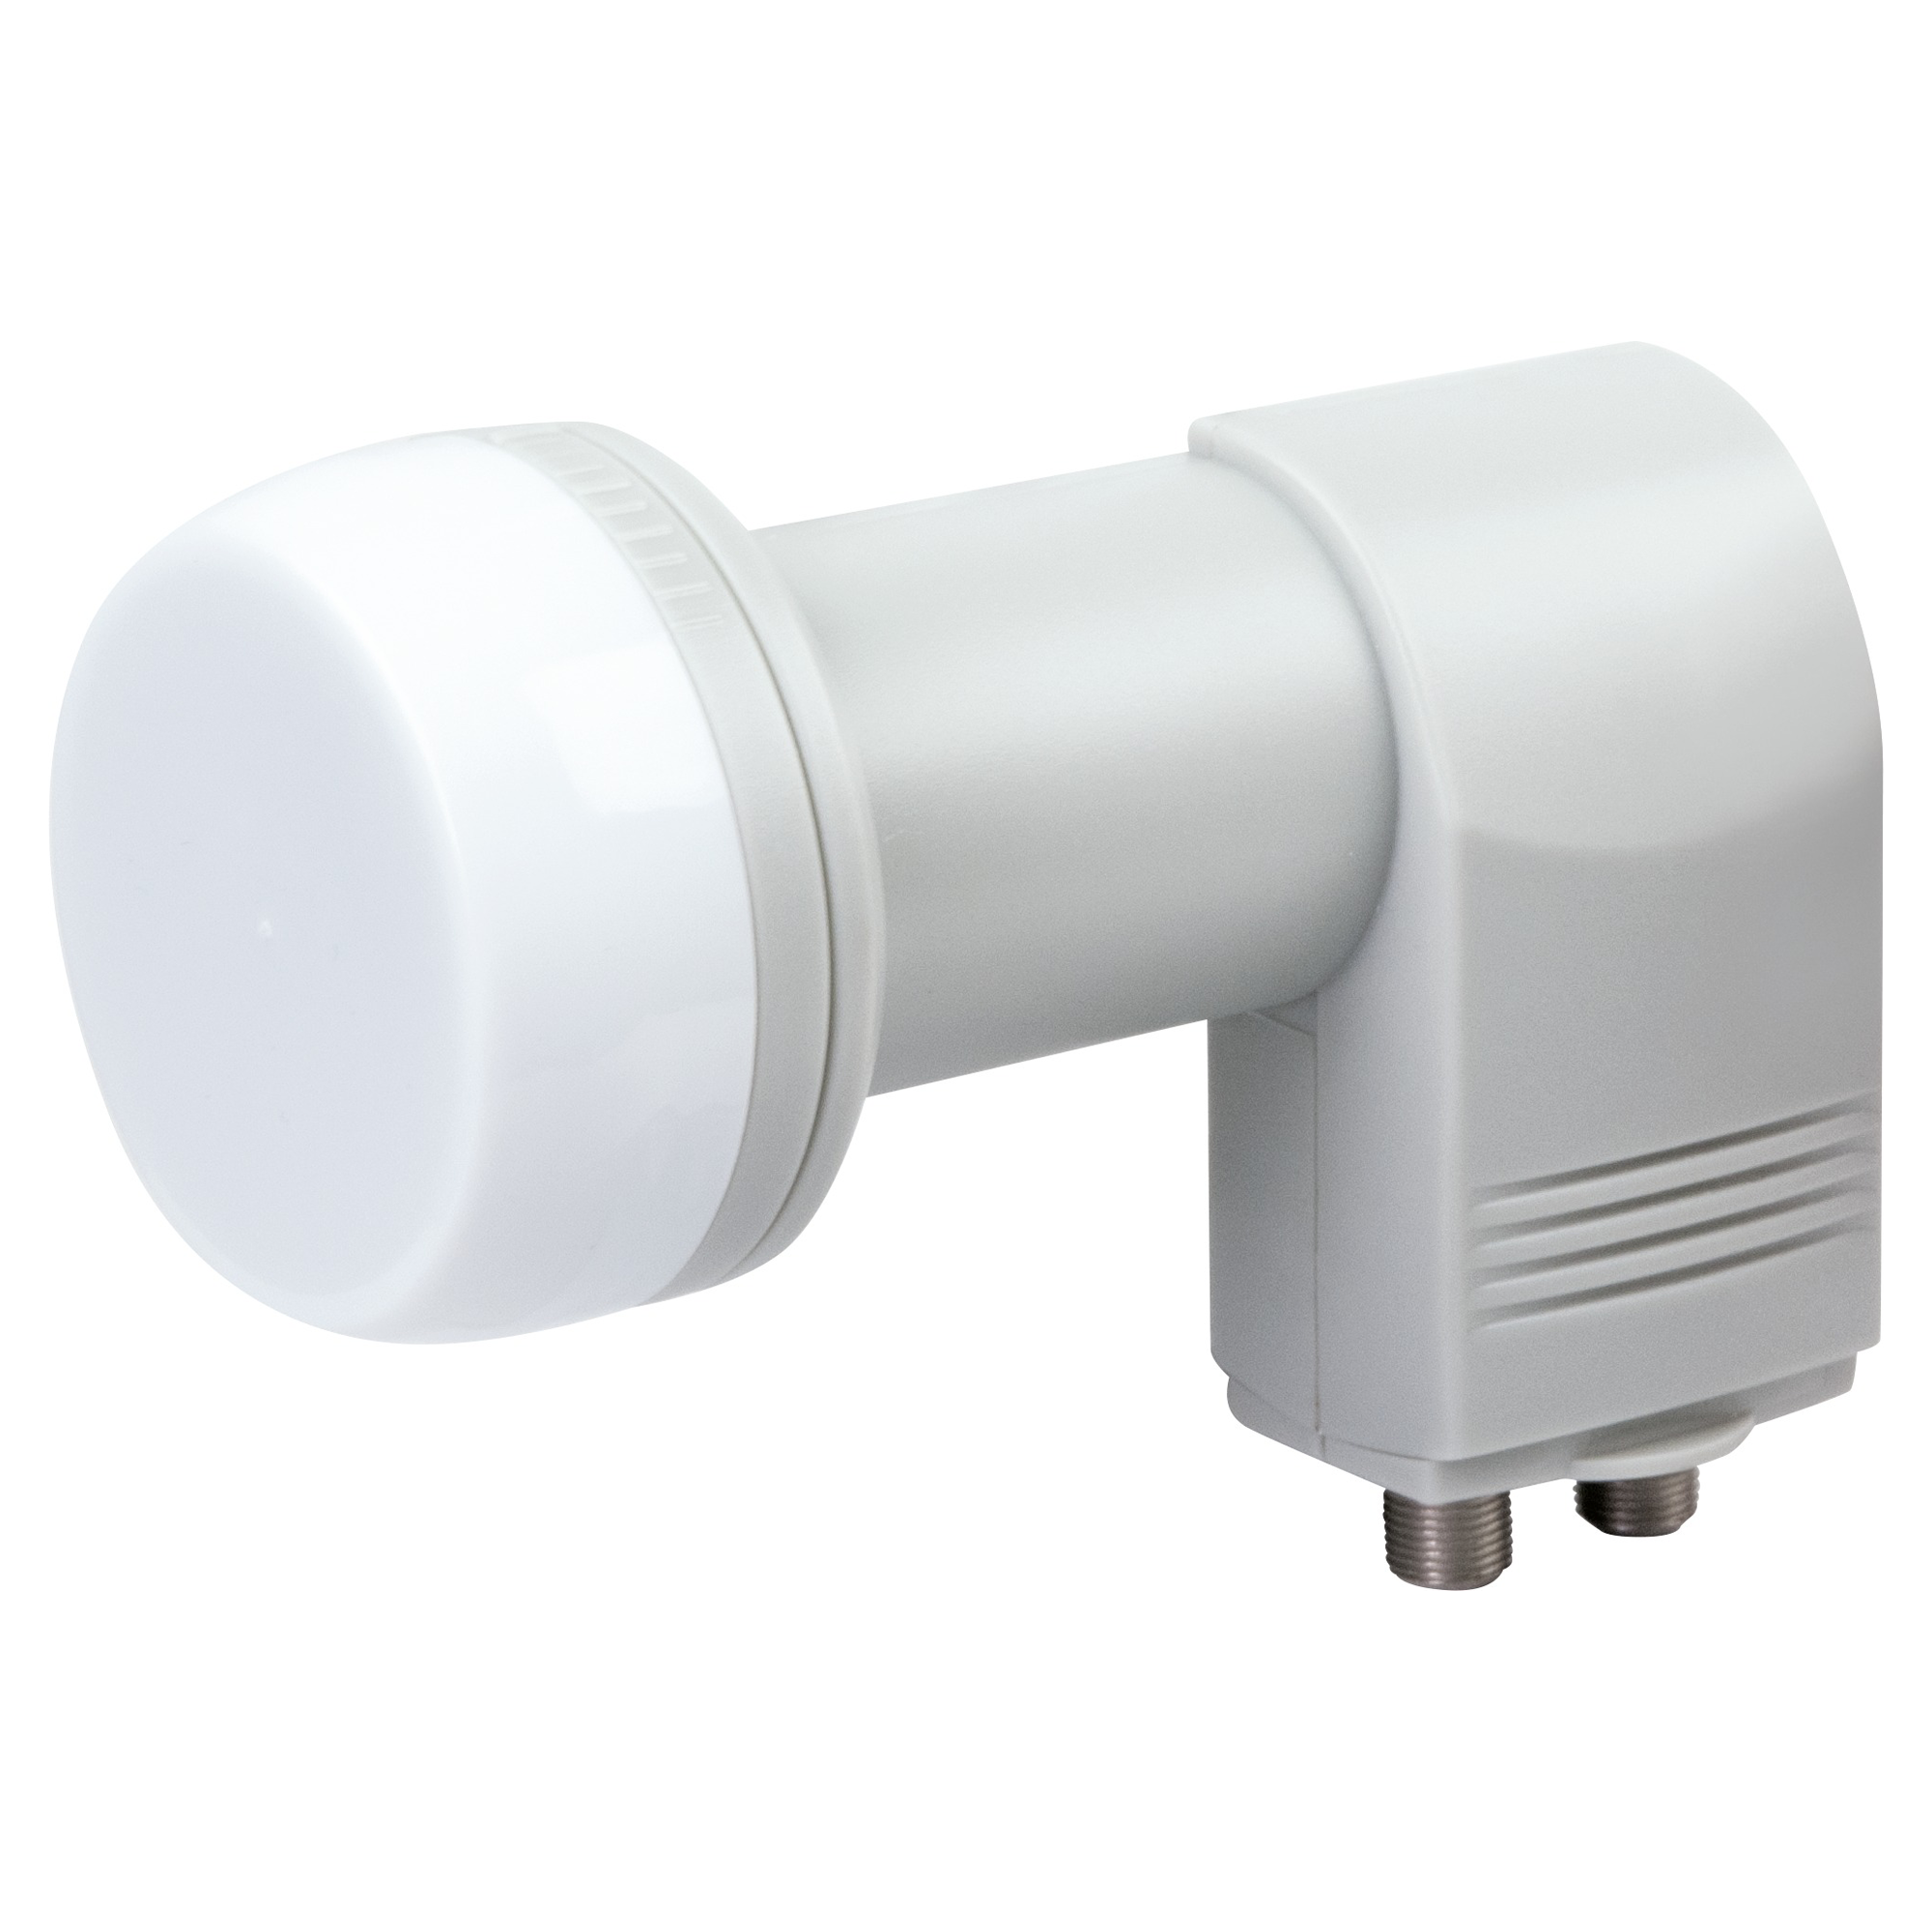 Digitales Twin "Standard" LNB HDTV + product picture